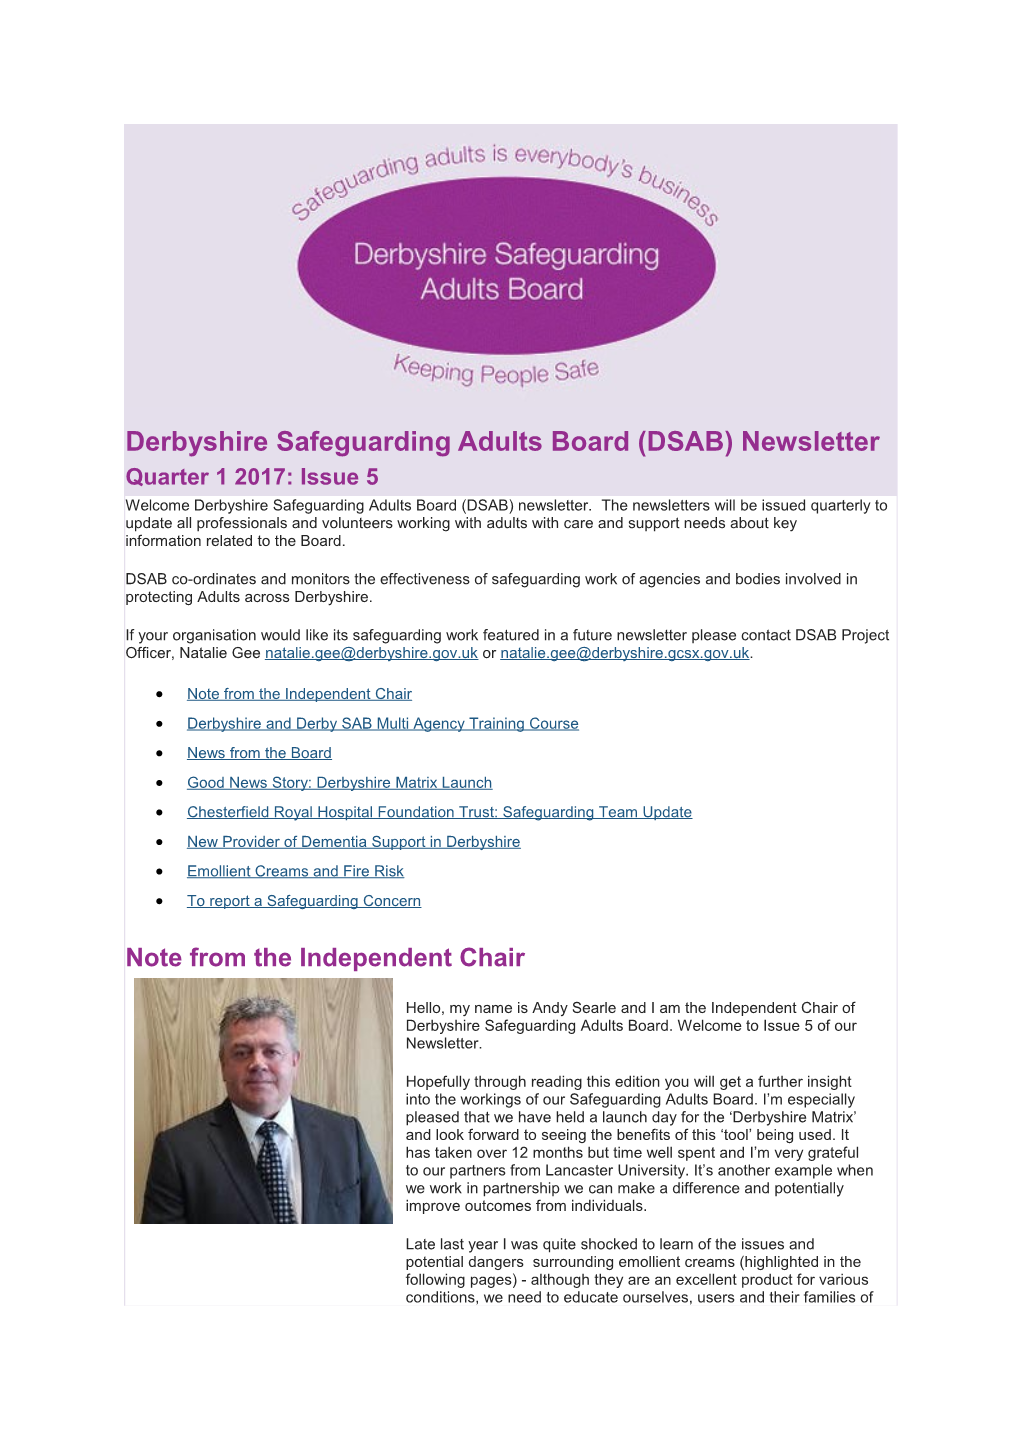 Safeguarding Adults Board Newsletter Issue 5